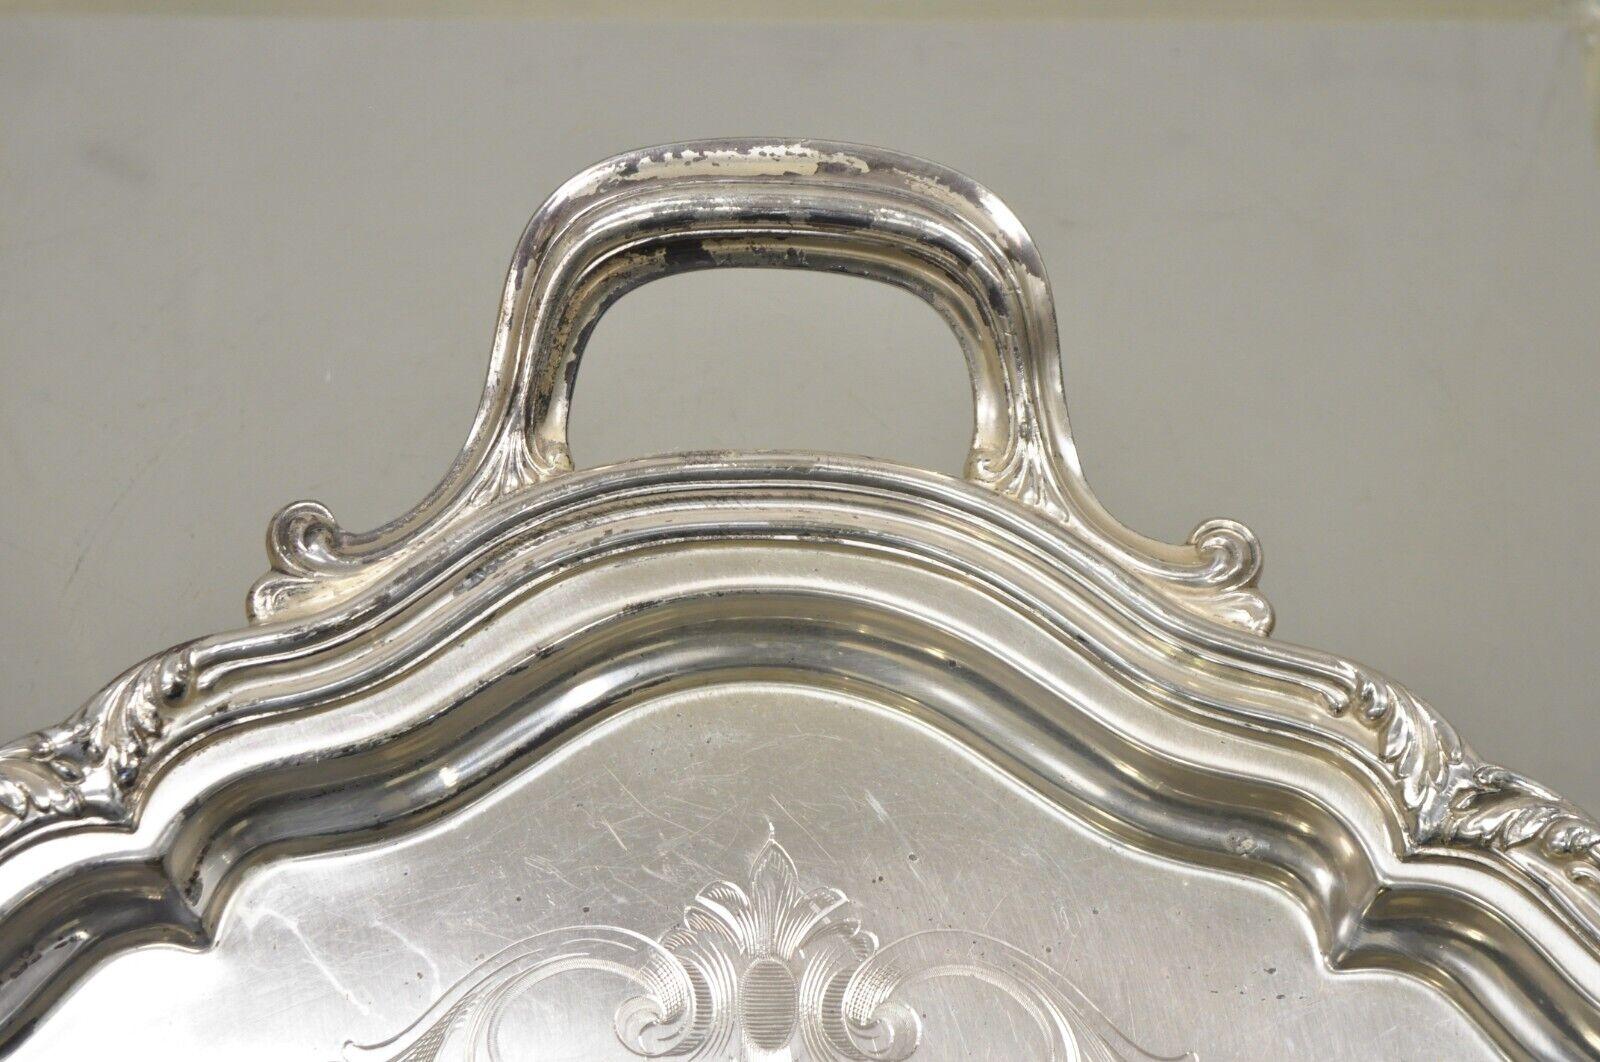 Antique Reed & Barton EPNS 06143 Silver Plated Handle Tray Serving Platter 2